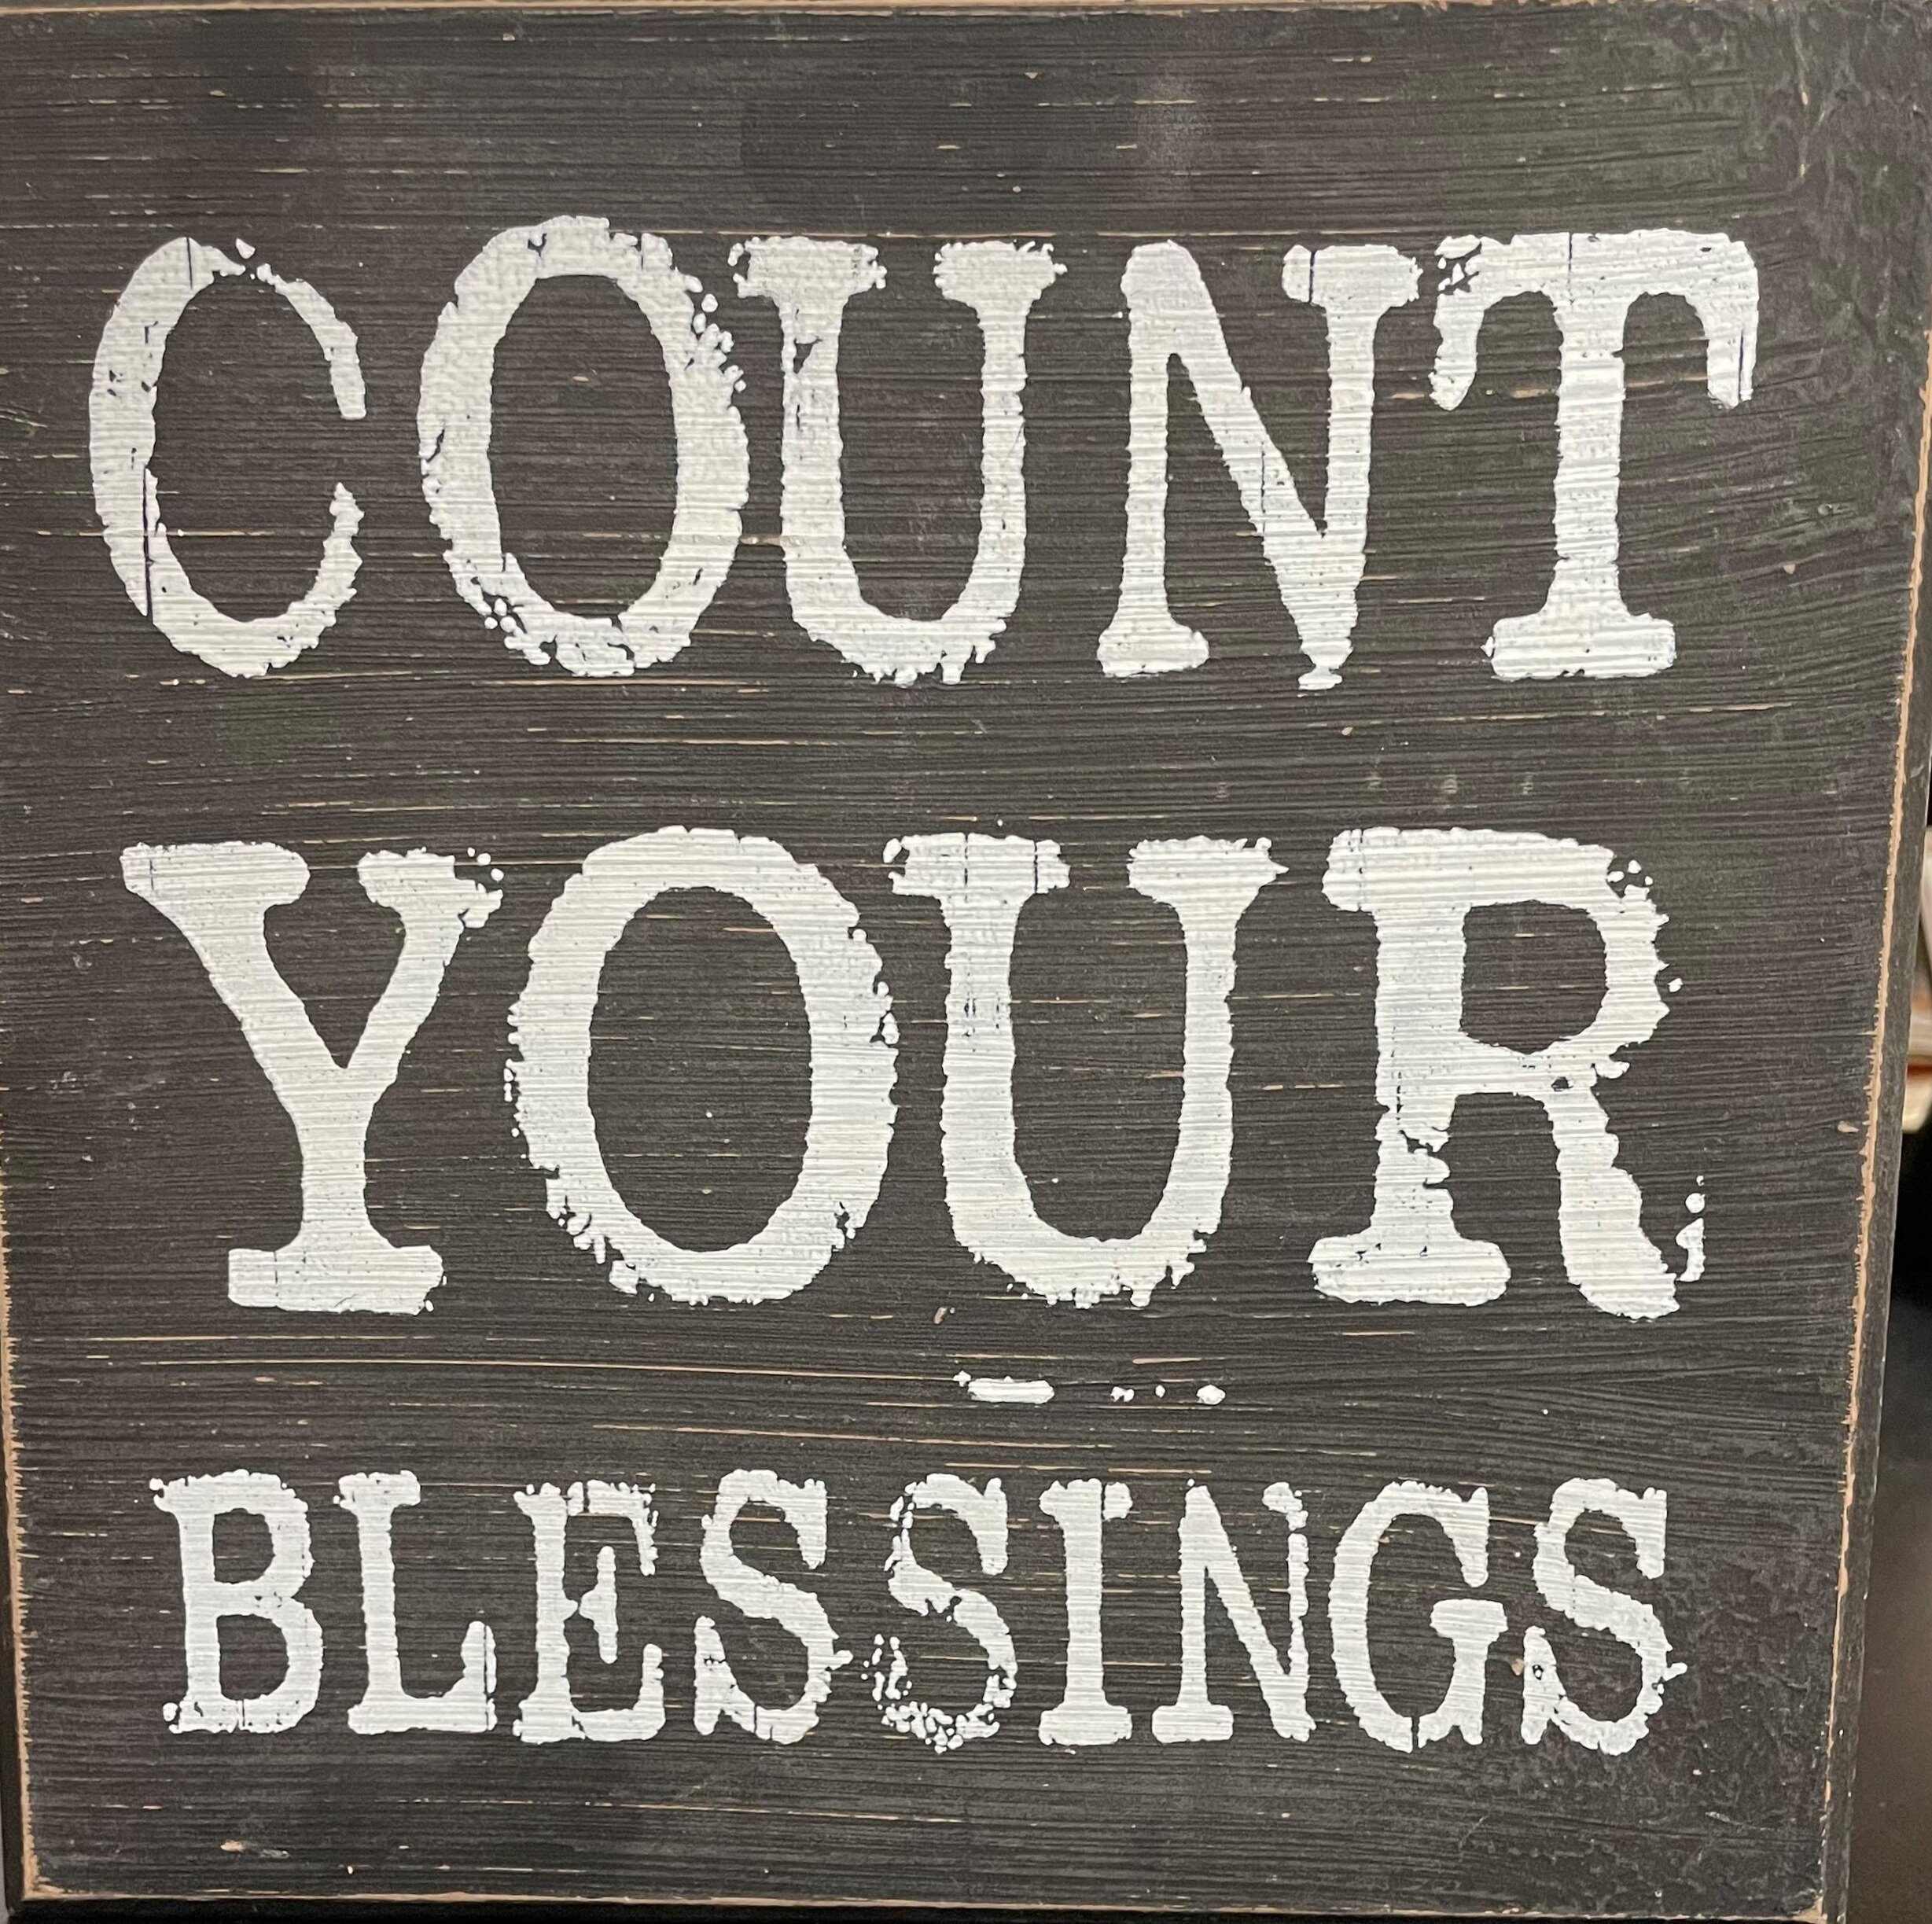 The Count Your Blessings sign on Ms. Lee’s desk